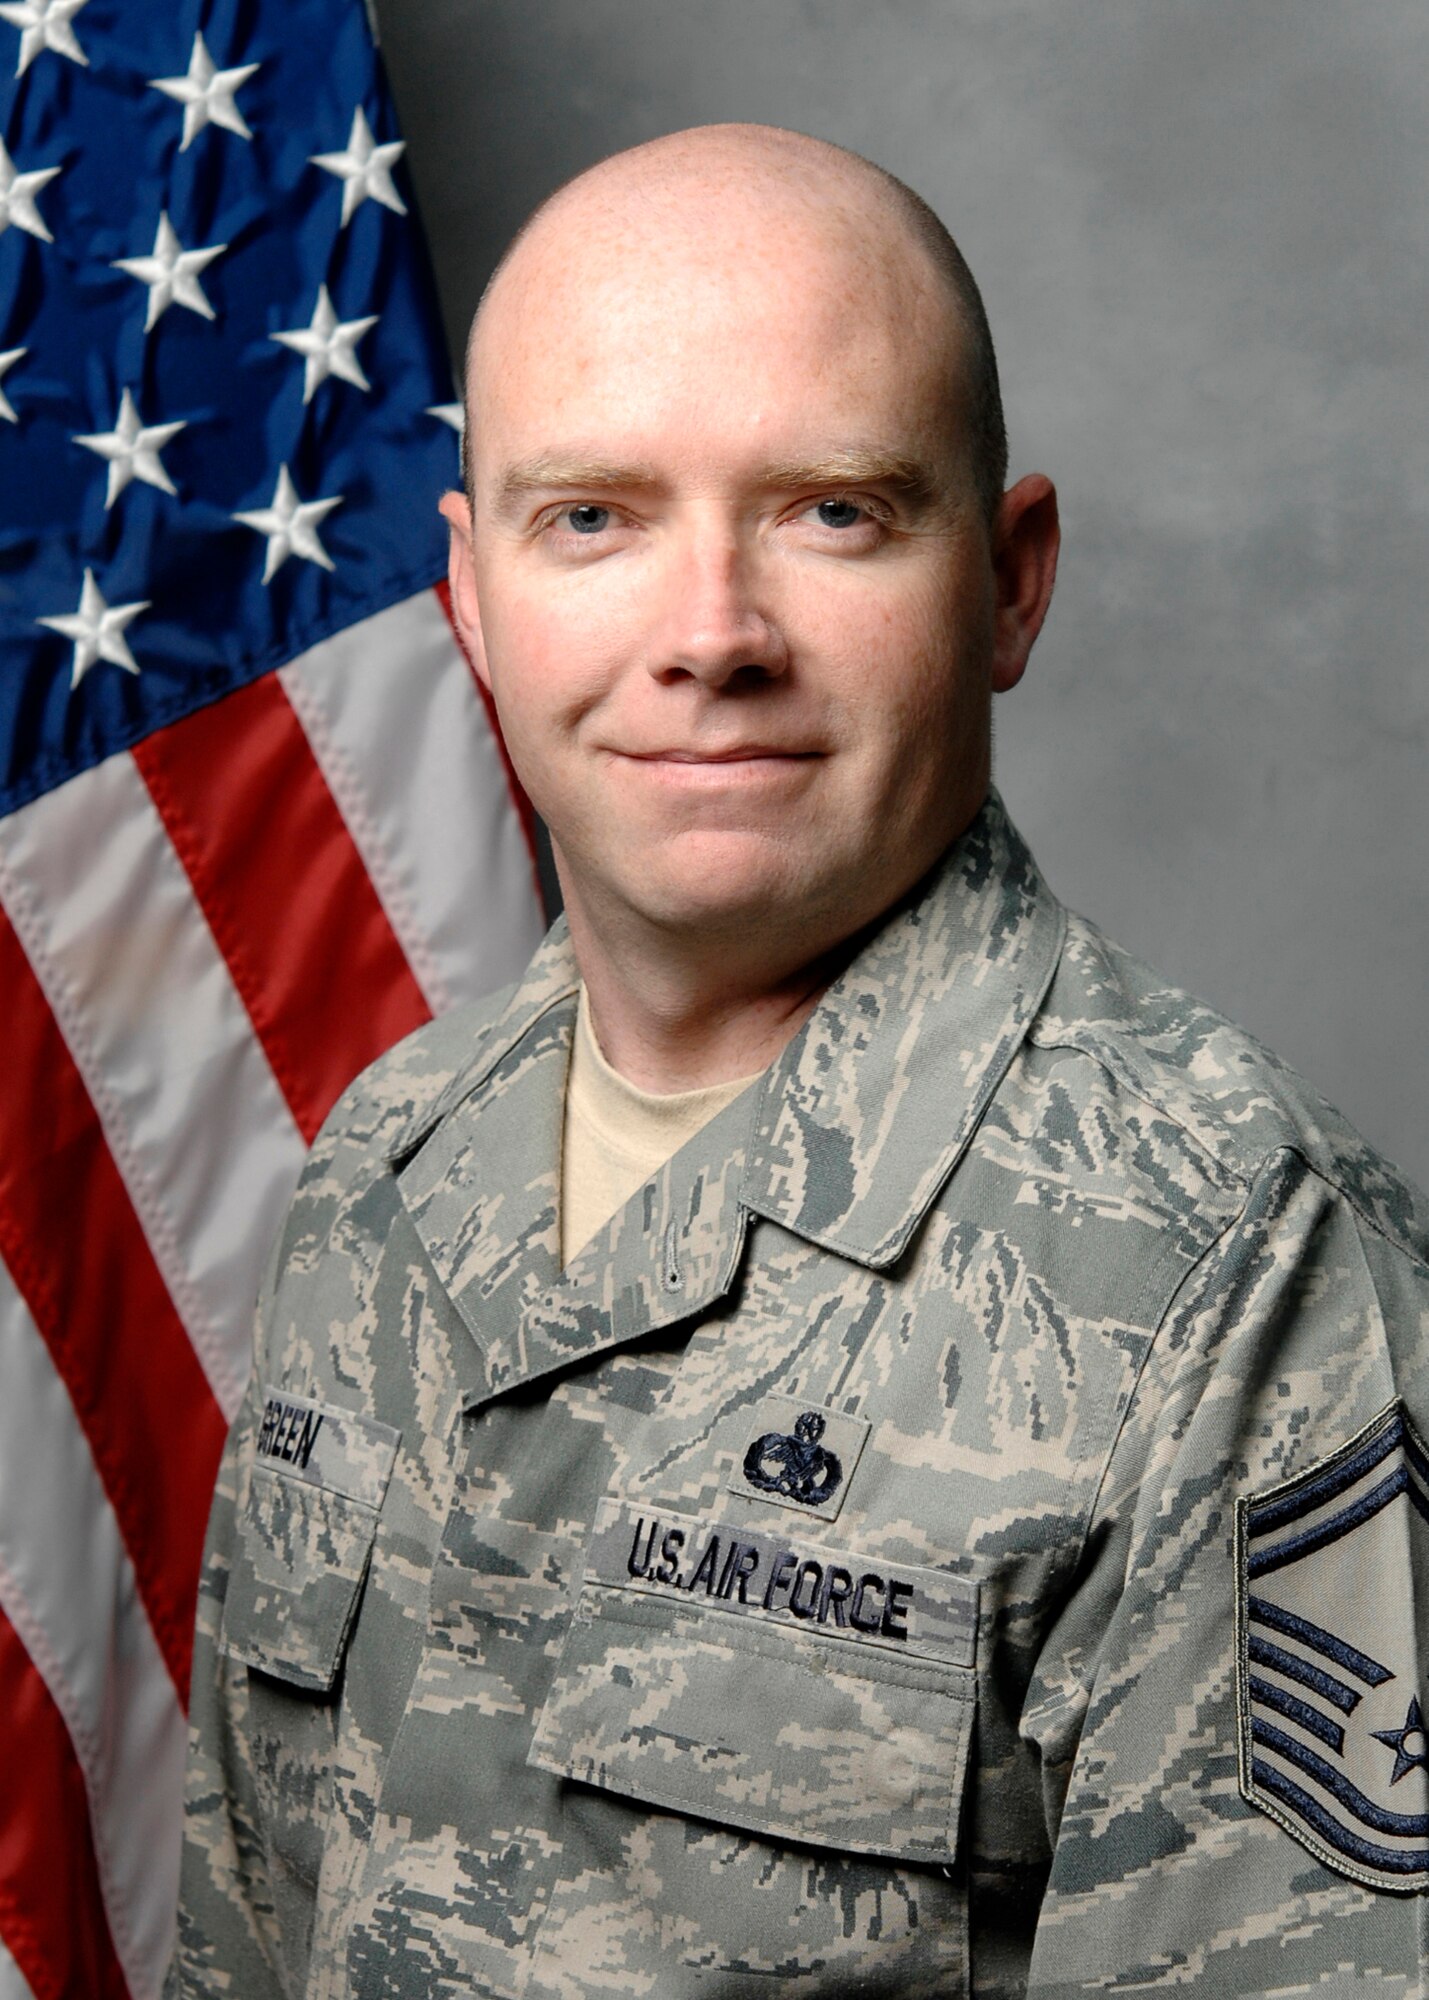 OFFUTT AIR FORCE BASE, Neb. -- Senior Master Sgt. Timothy J. Green, currently deployed in support of contingency operations is one of 29 Airmen nominated for awards who will attend the 2010 Air Combat Command Outstanding Airmen of the Year Awards Banquet in Omaha, Neb., April 21. Sergeant Green is nominated for the SNCO of the Year Award. U.S. Air Force courtesy photo